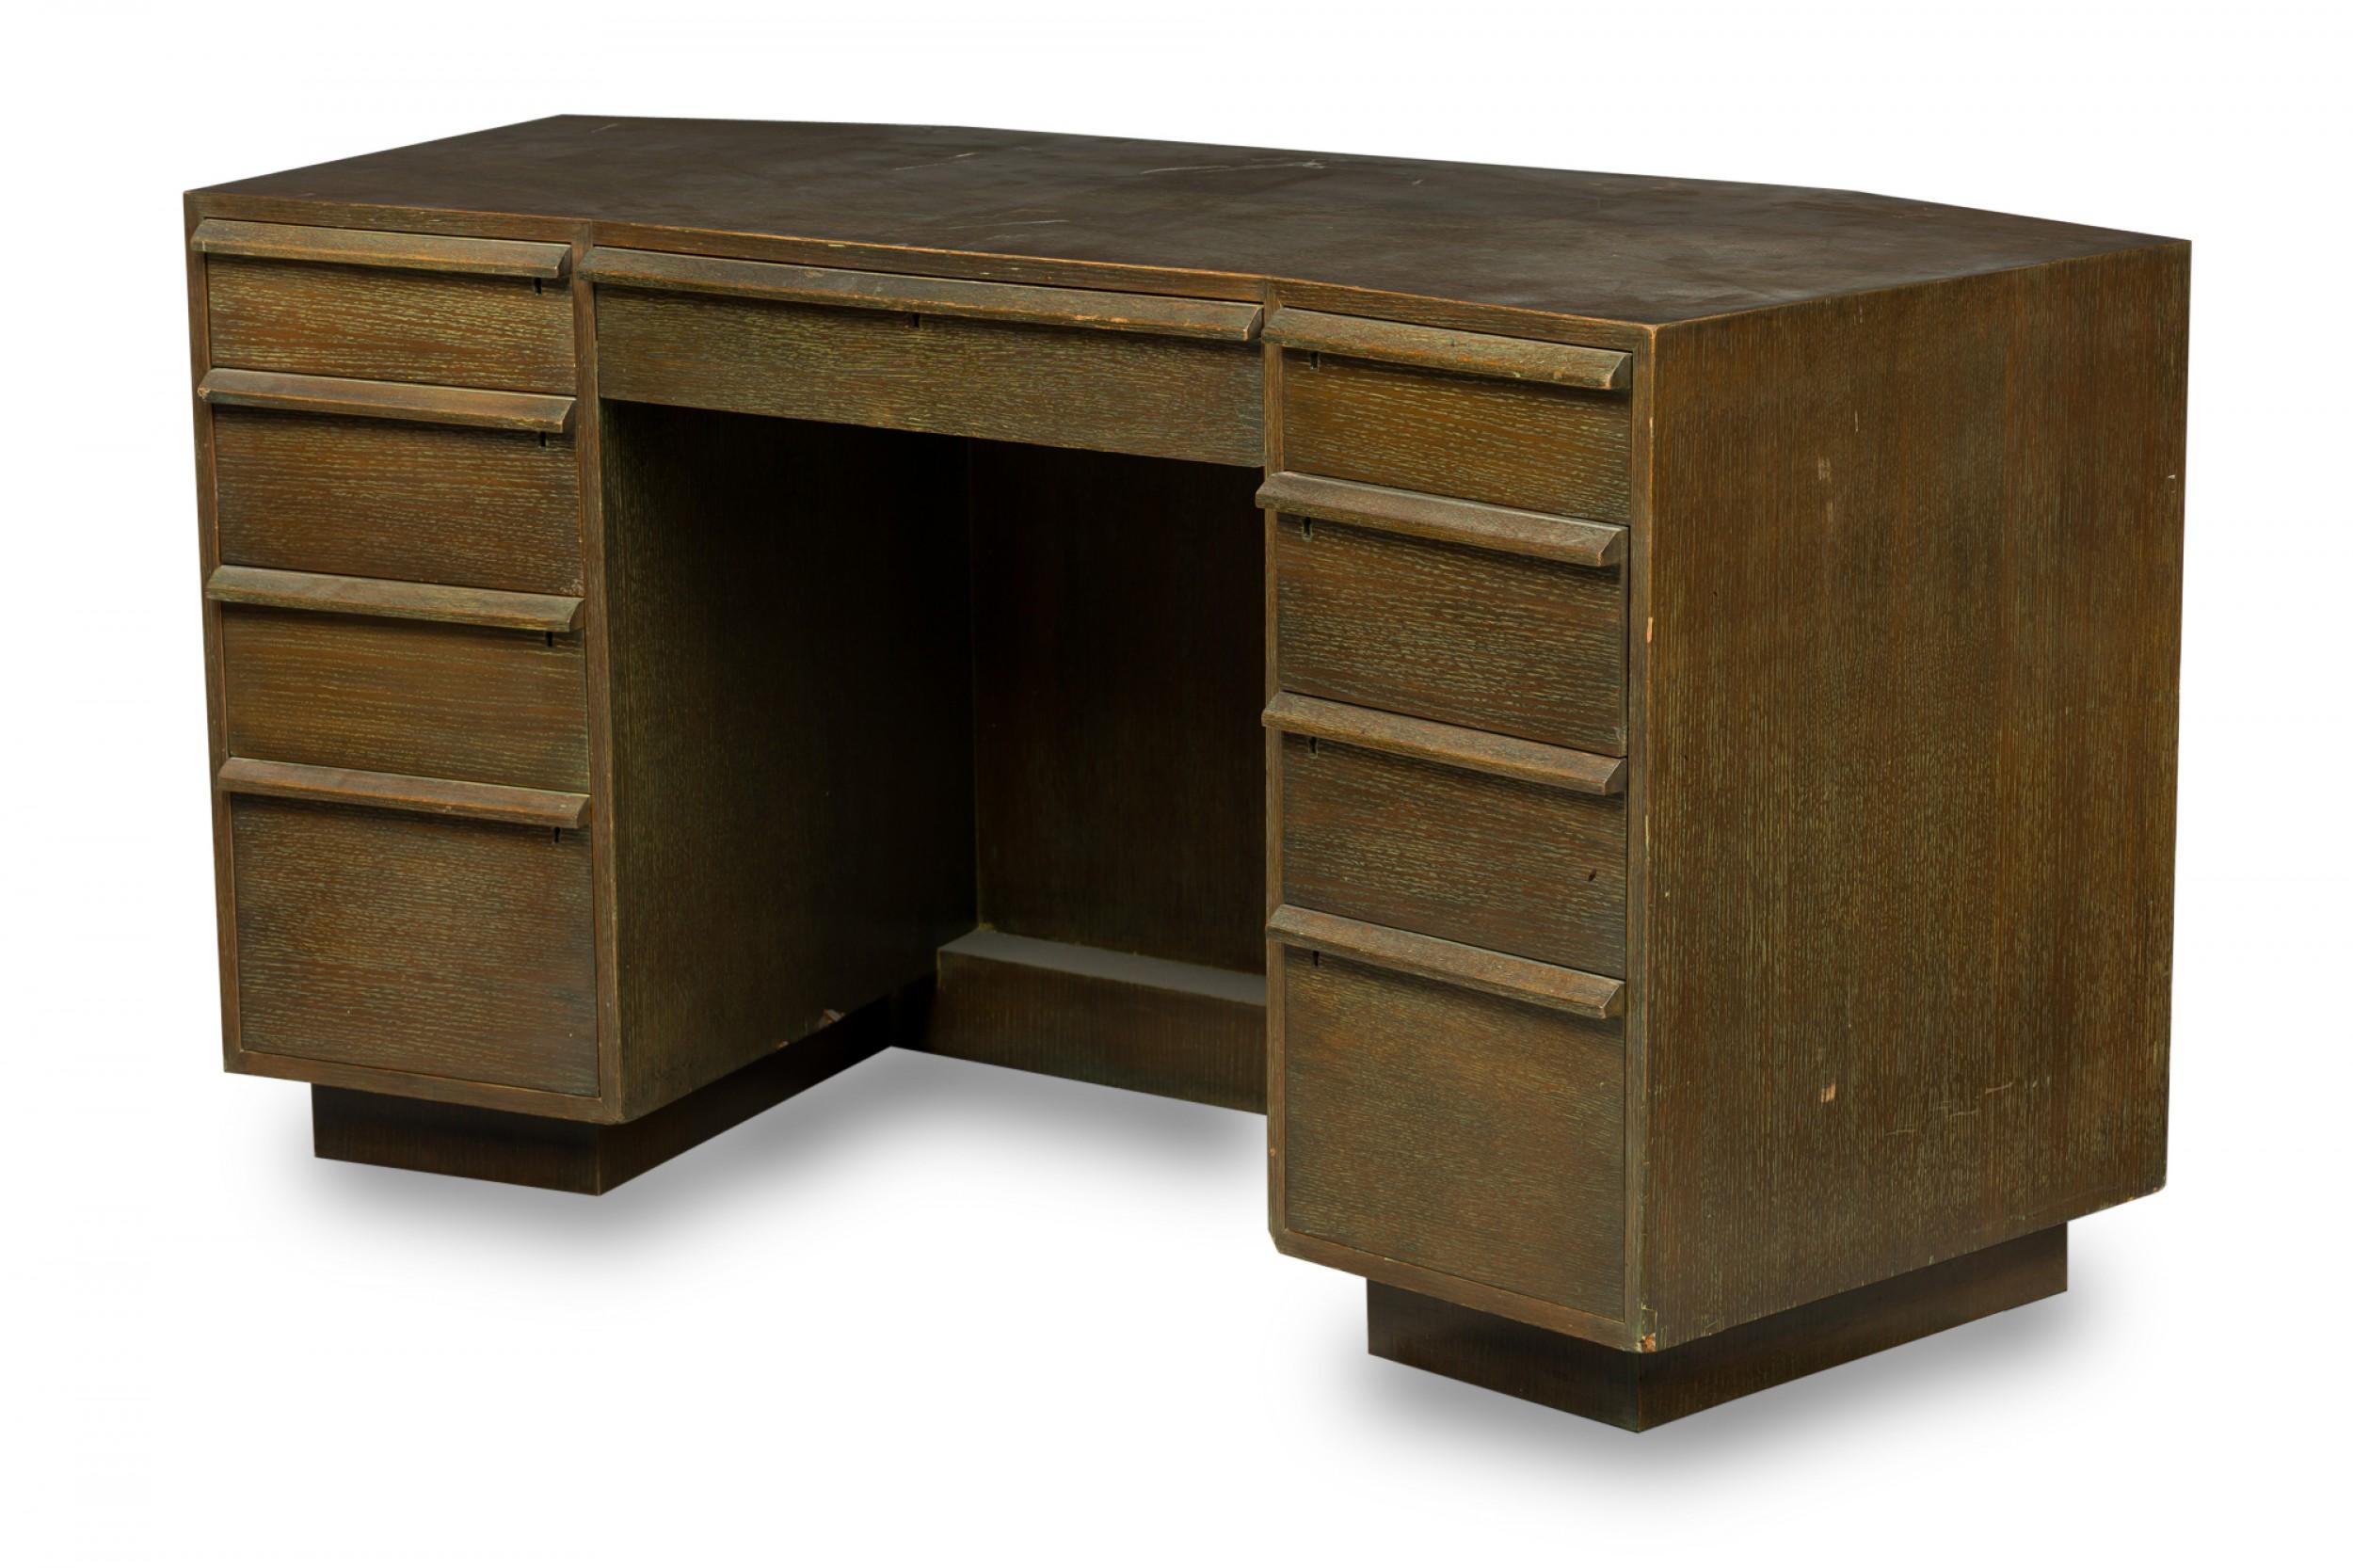 French midcentury cerused oak kneehole desk with a central drawer flanked on either side by a column of four drawers, with wooden top-mounted drawer pulls. (Attributed to Jacques Adnet).